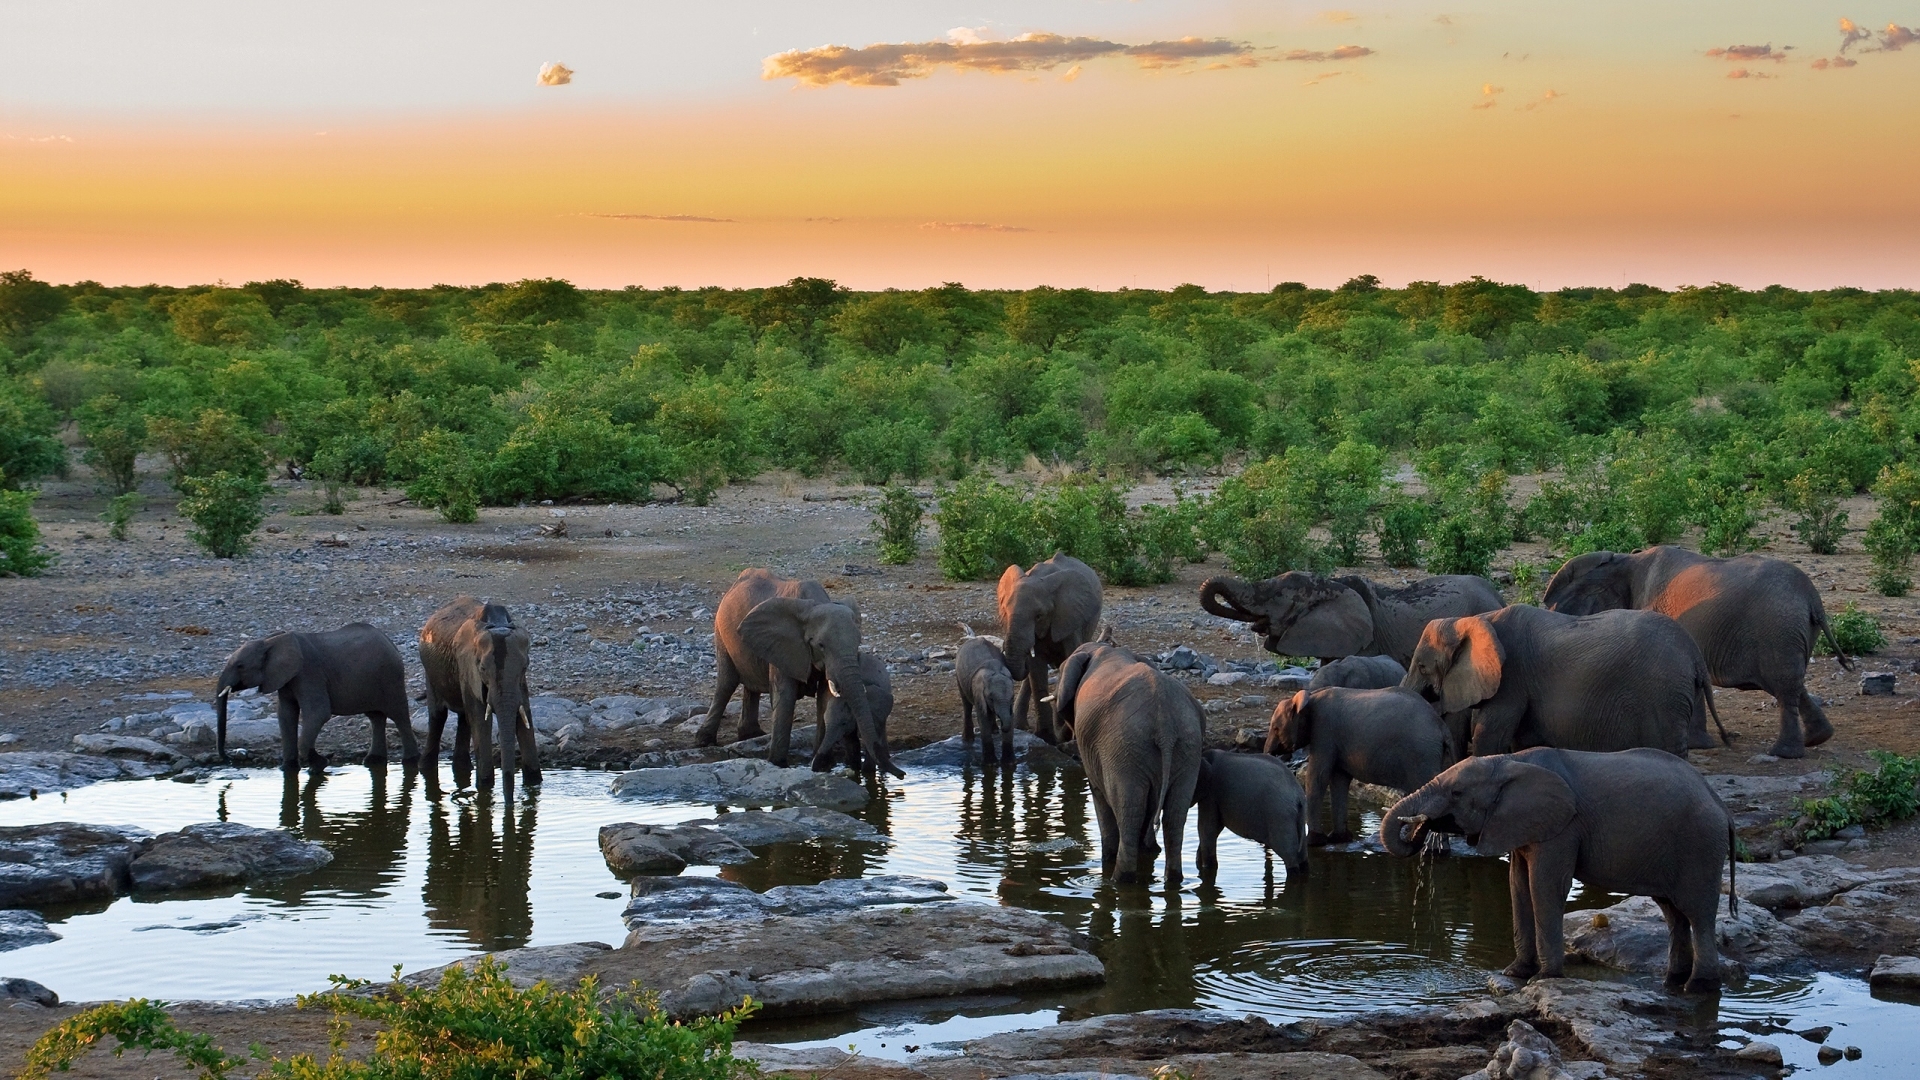 Sunset with Elephants for 1920 x 1080 HDTV 1080p resolution